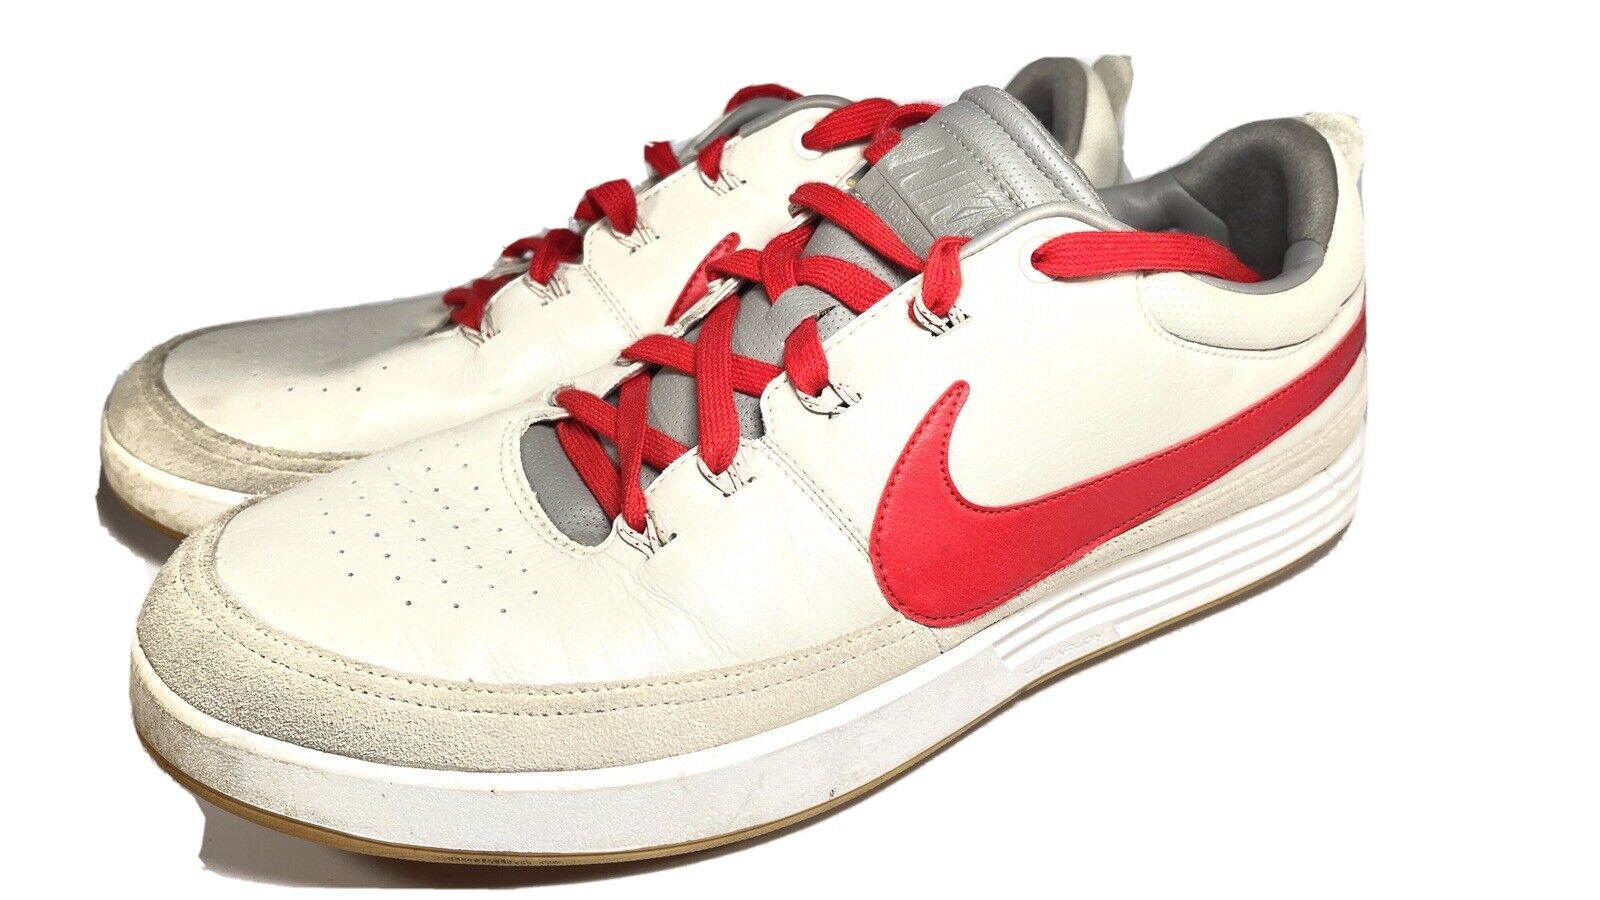 Nike Lunar Waverly Spikeless Gold Shoes Mens US 14 Red White Grey 652780-005 